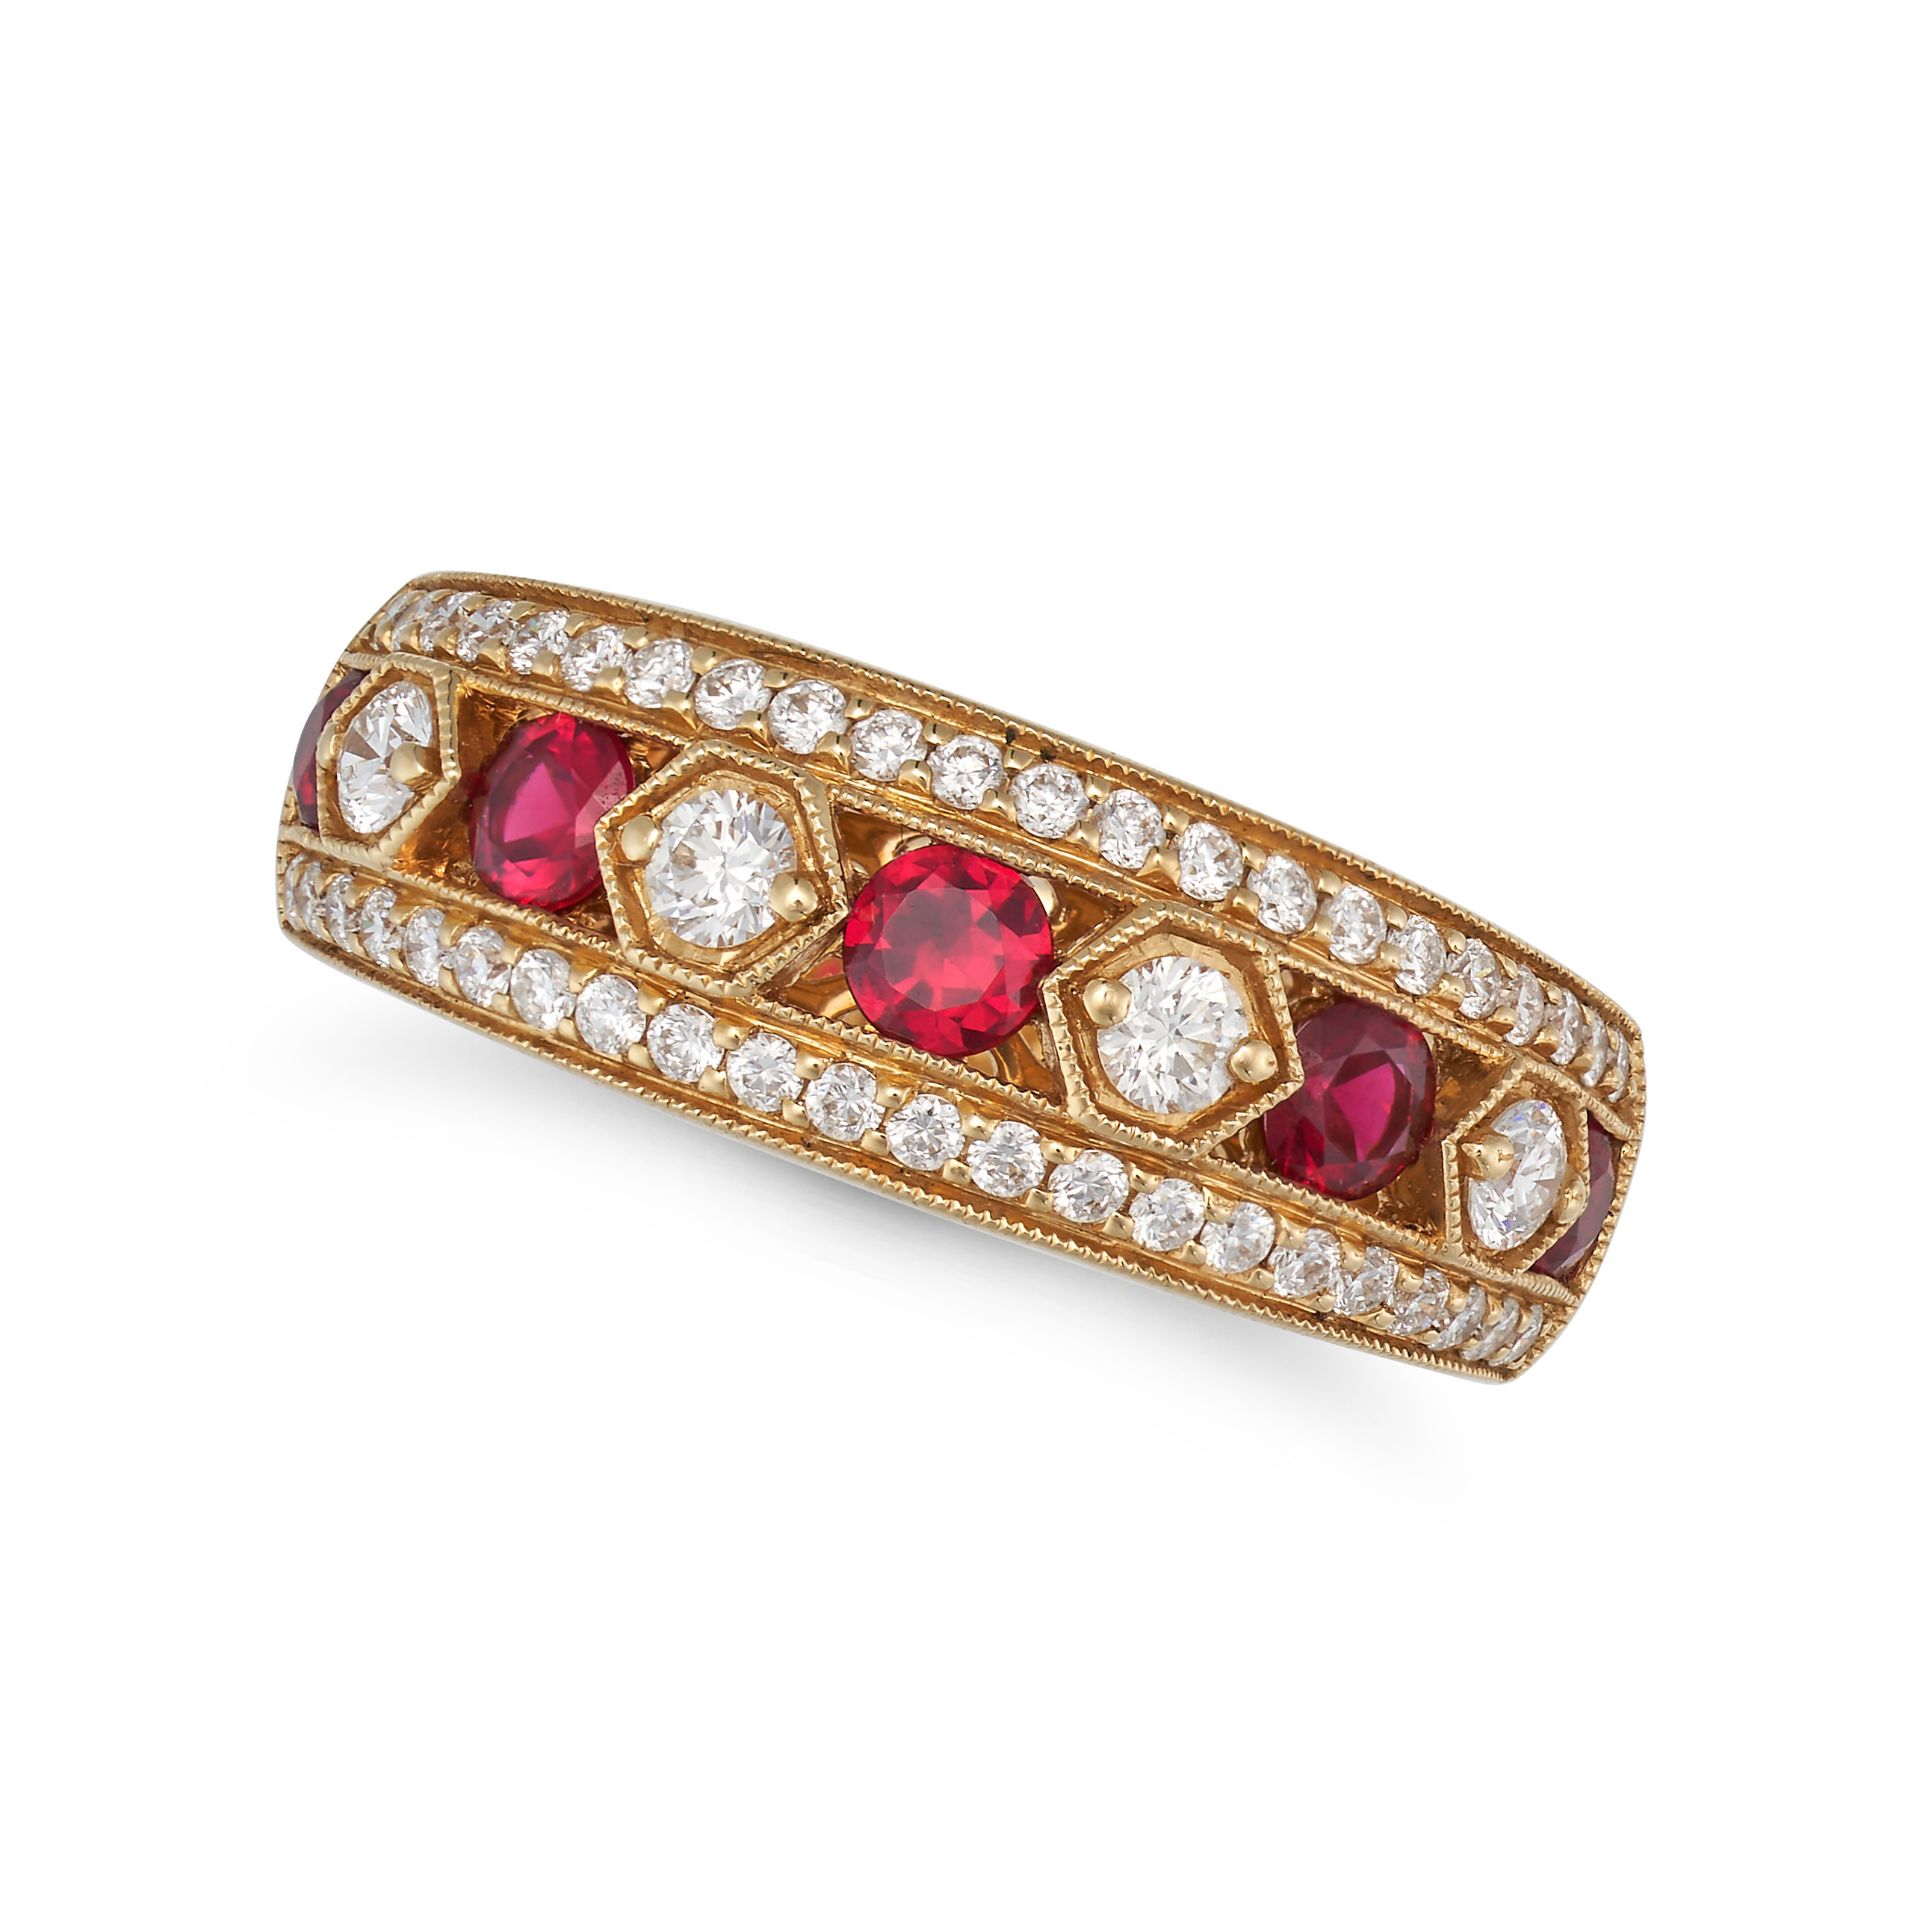 NO RESERVE - A SYNTHETIC RUBY AND DIAMOND RING in 18ct yellow gold, set with a row of alternating...